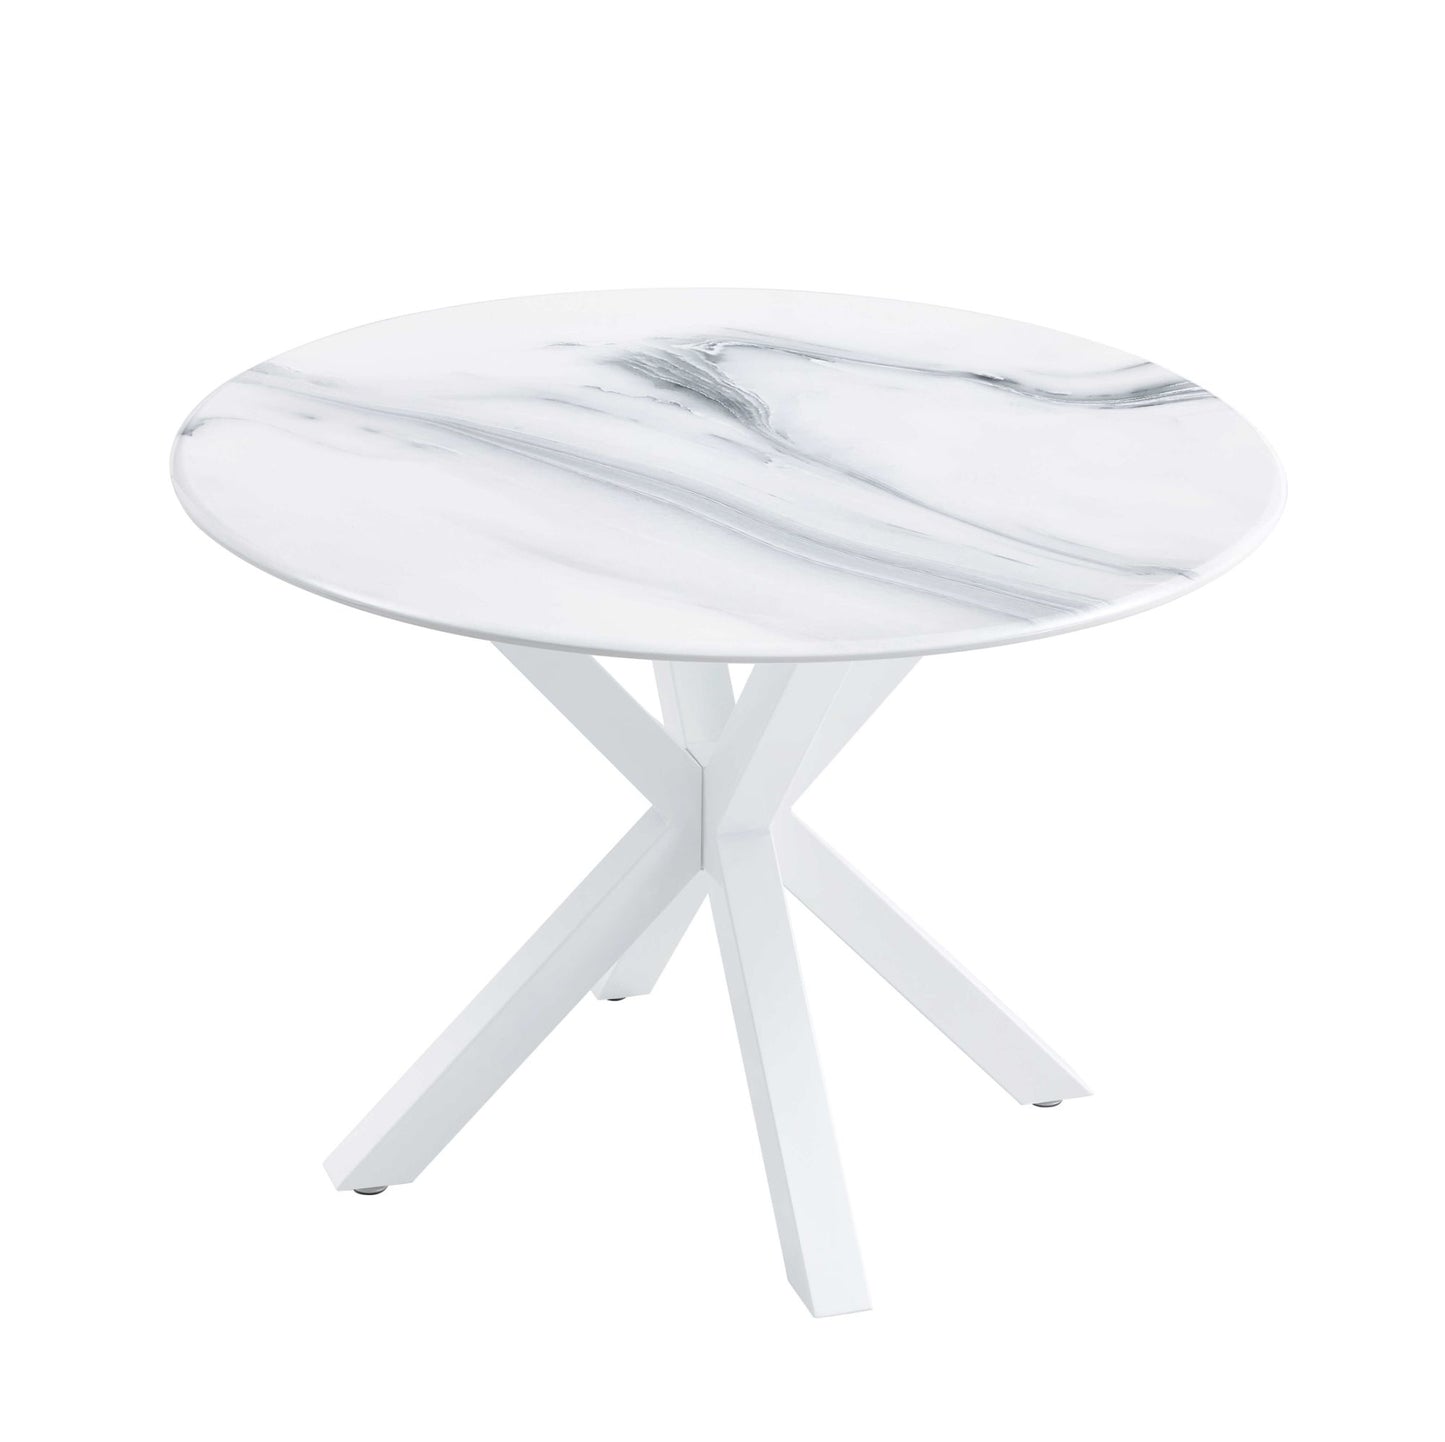 mdf dining table set, white